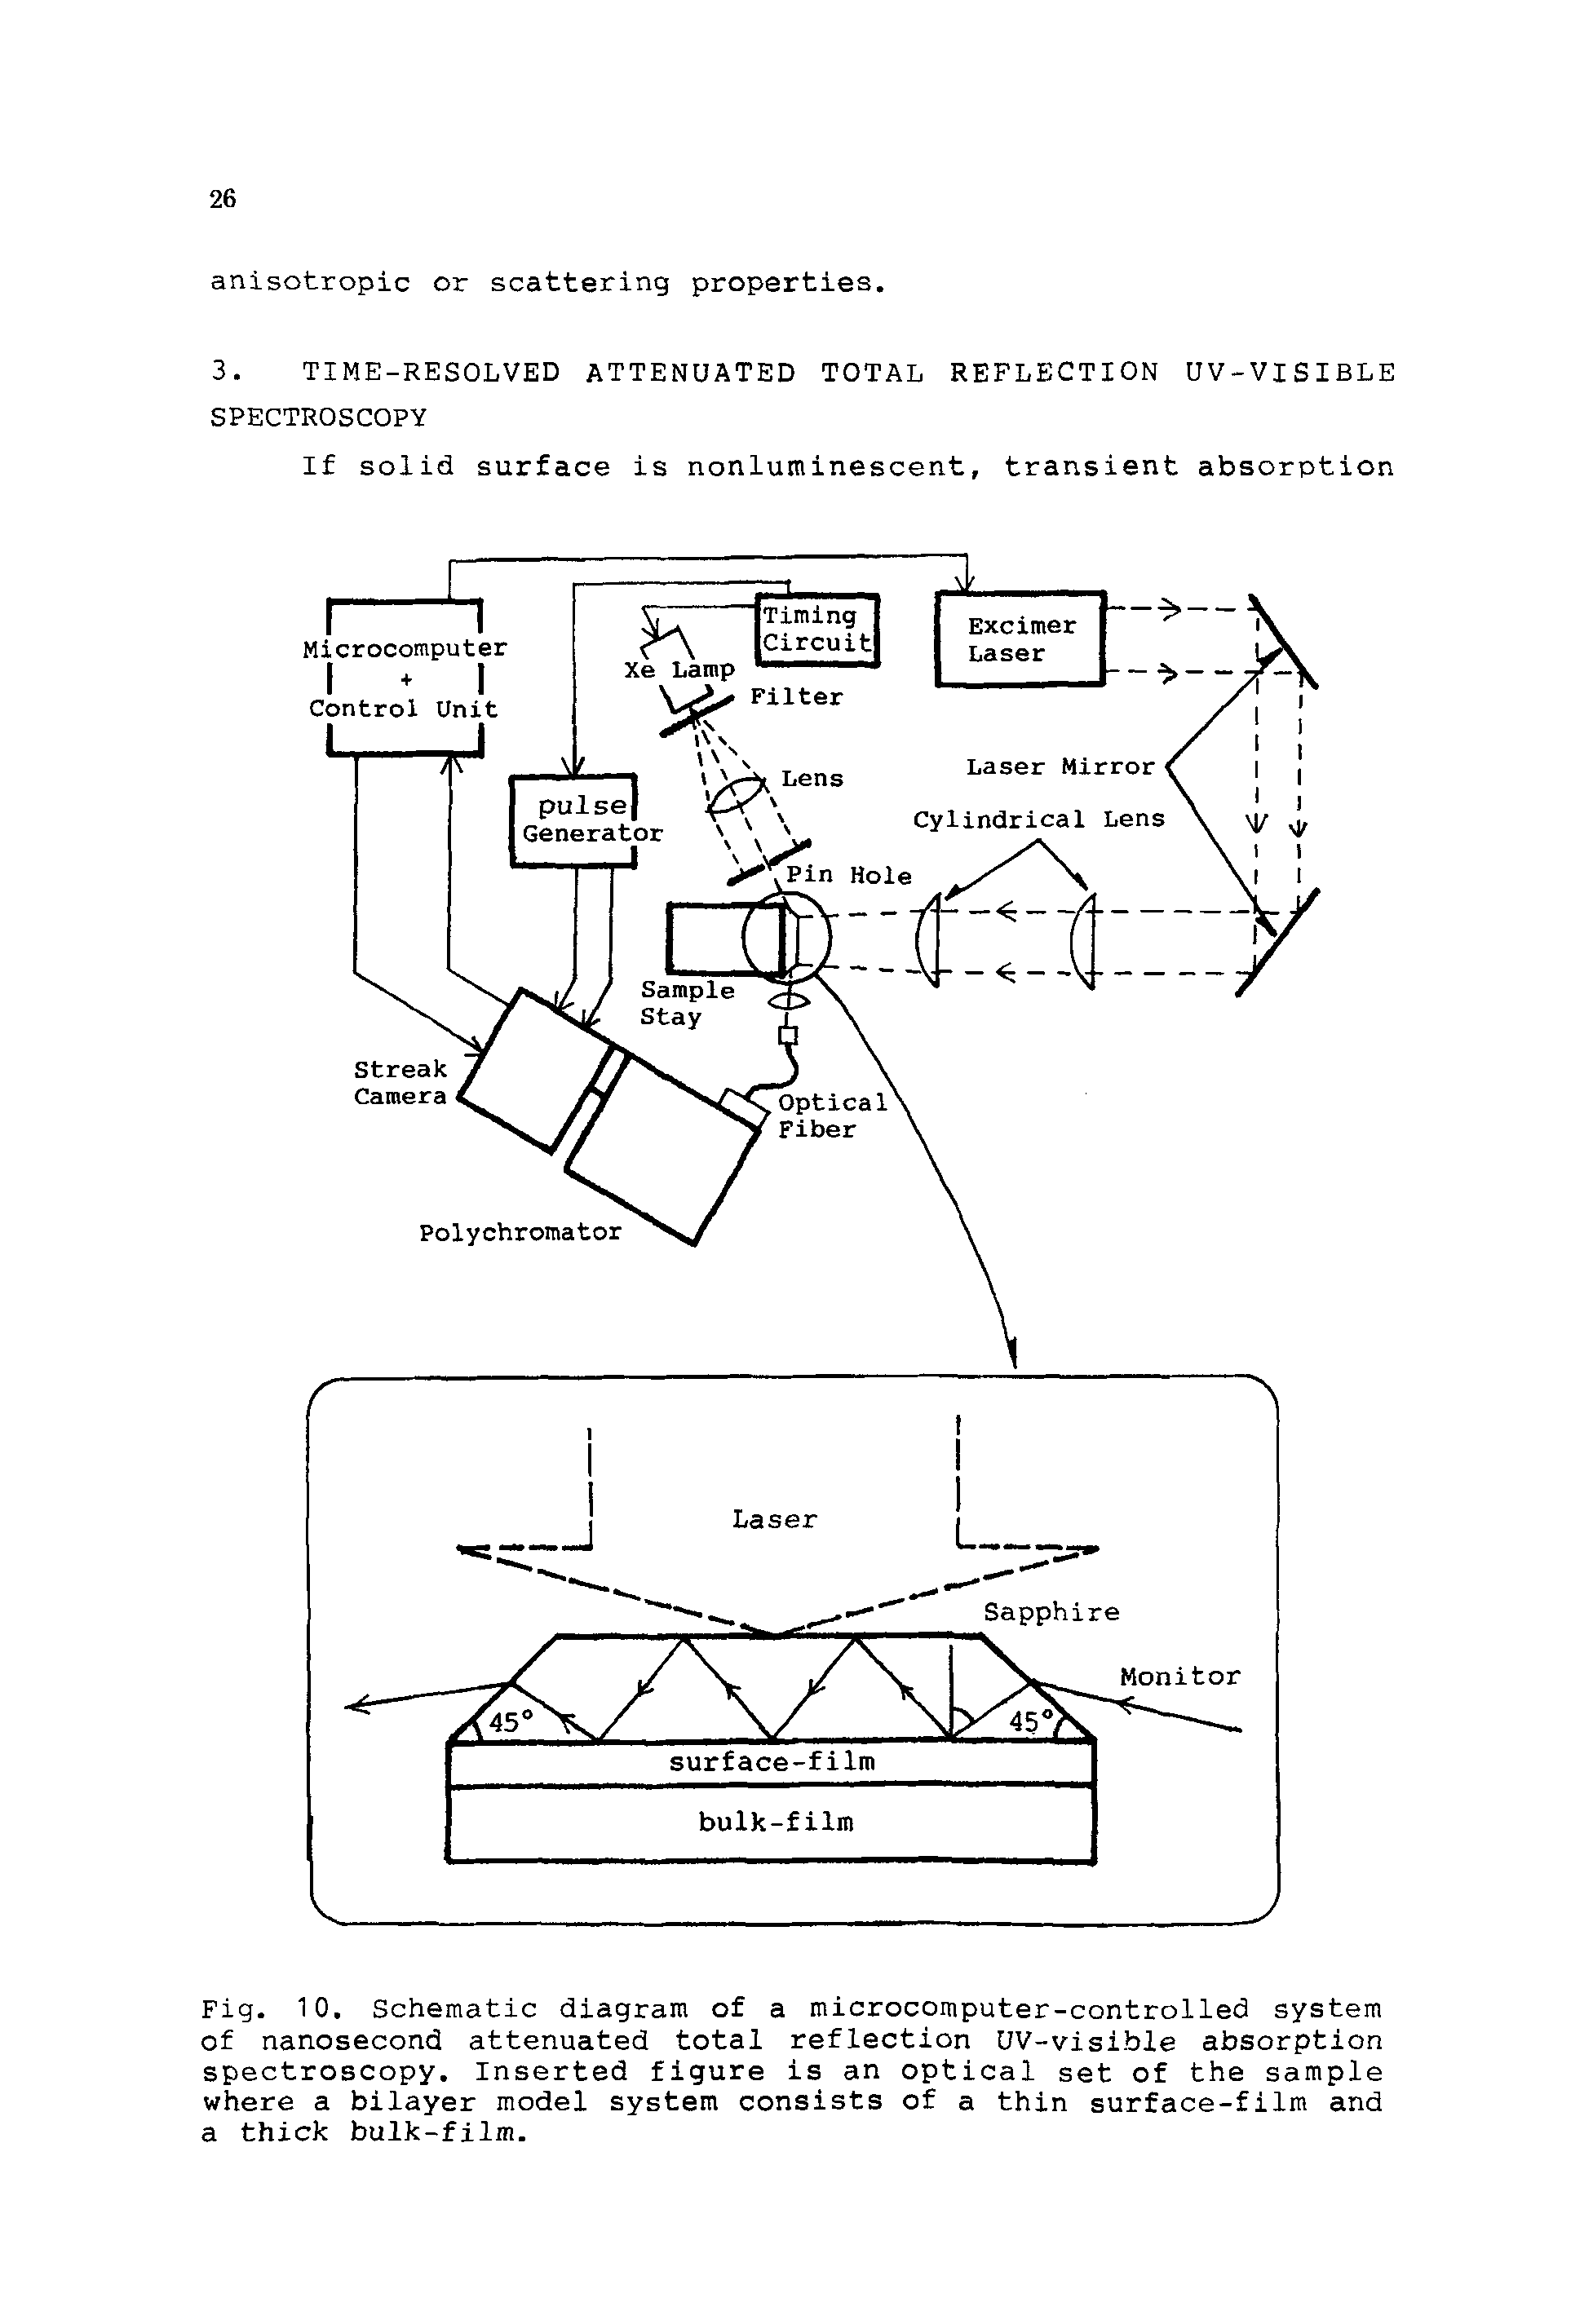 Fig. 10. Schematic diagram of a microcomputer-controlled system of nanosecond attenuated total reflection UV-visible absorption spectroscopy. Inserted figure is an optical set of the sample where a bilayer model system consists of a thin surface-film and a thick bulk-film.